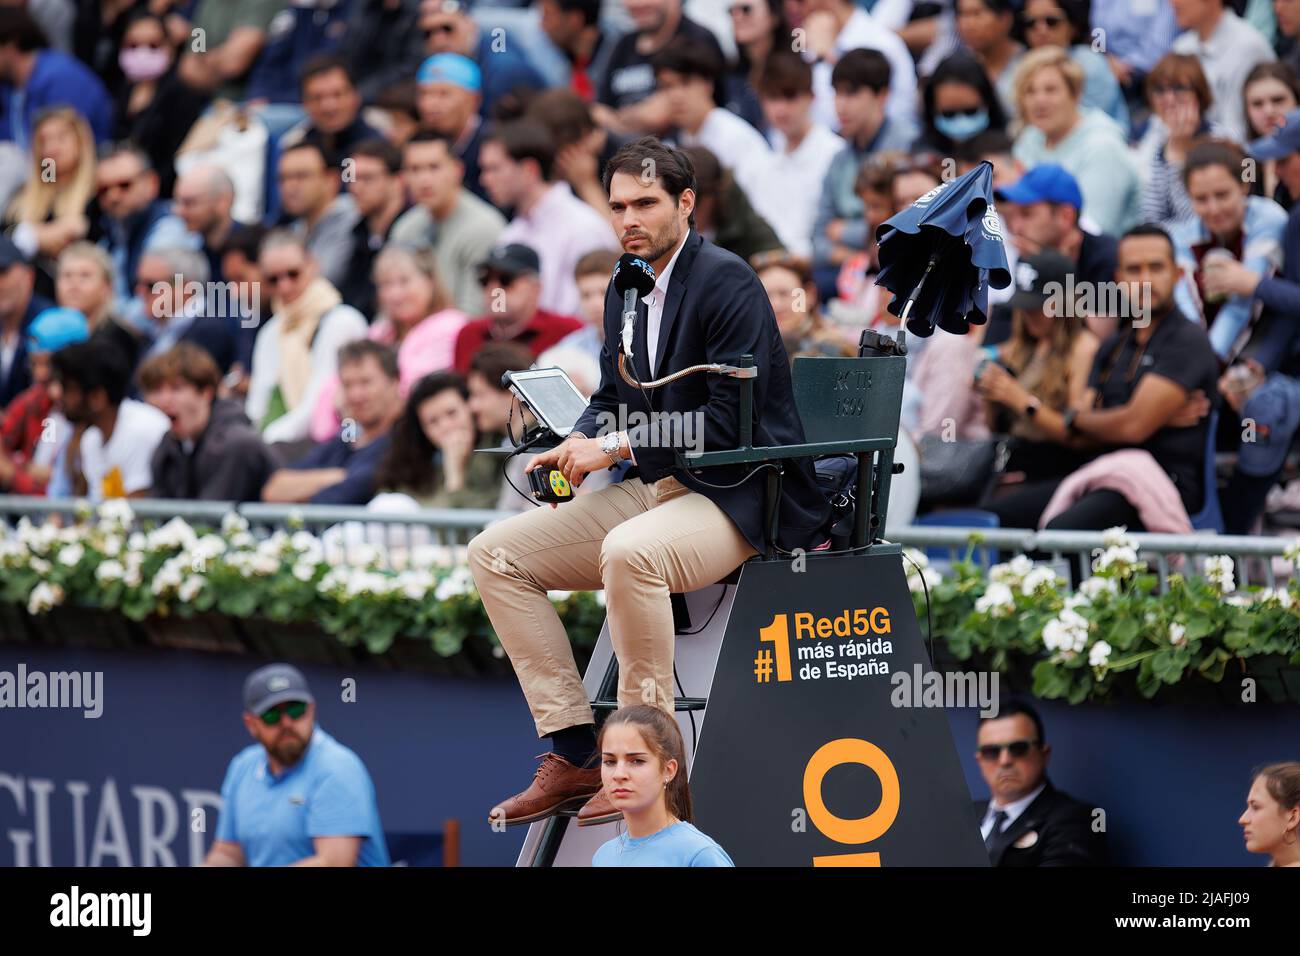 BARCELONA - APR 22: The chair umpire Nacho Forcadell in action during the Barcelona Open Banc Sabadell Tennis Tournament at Real Club De Tenis Barcelo Stock Photo